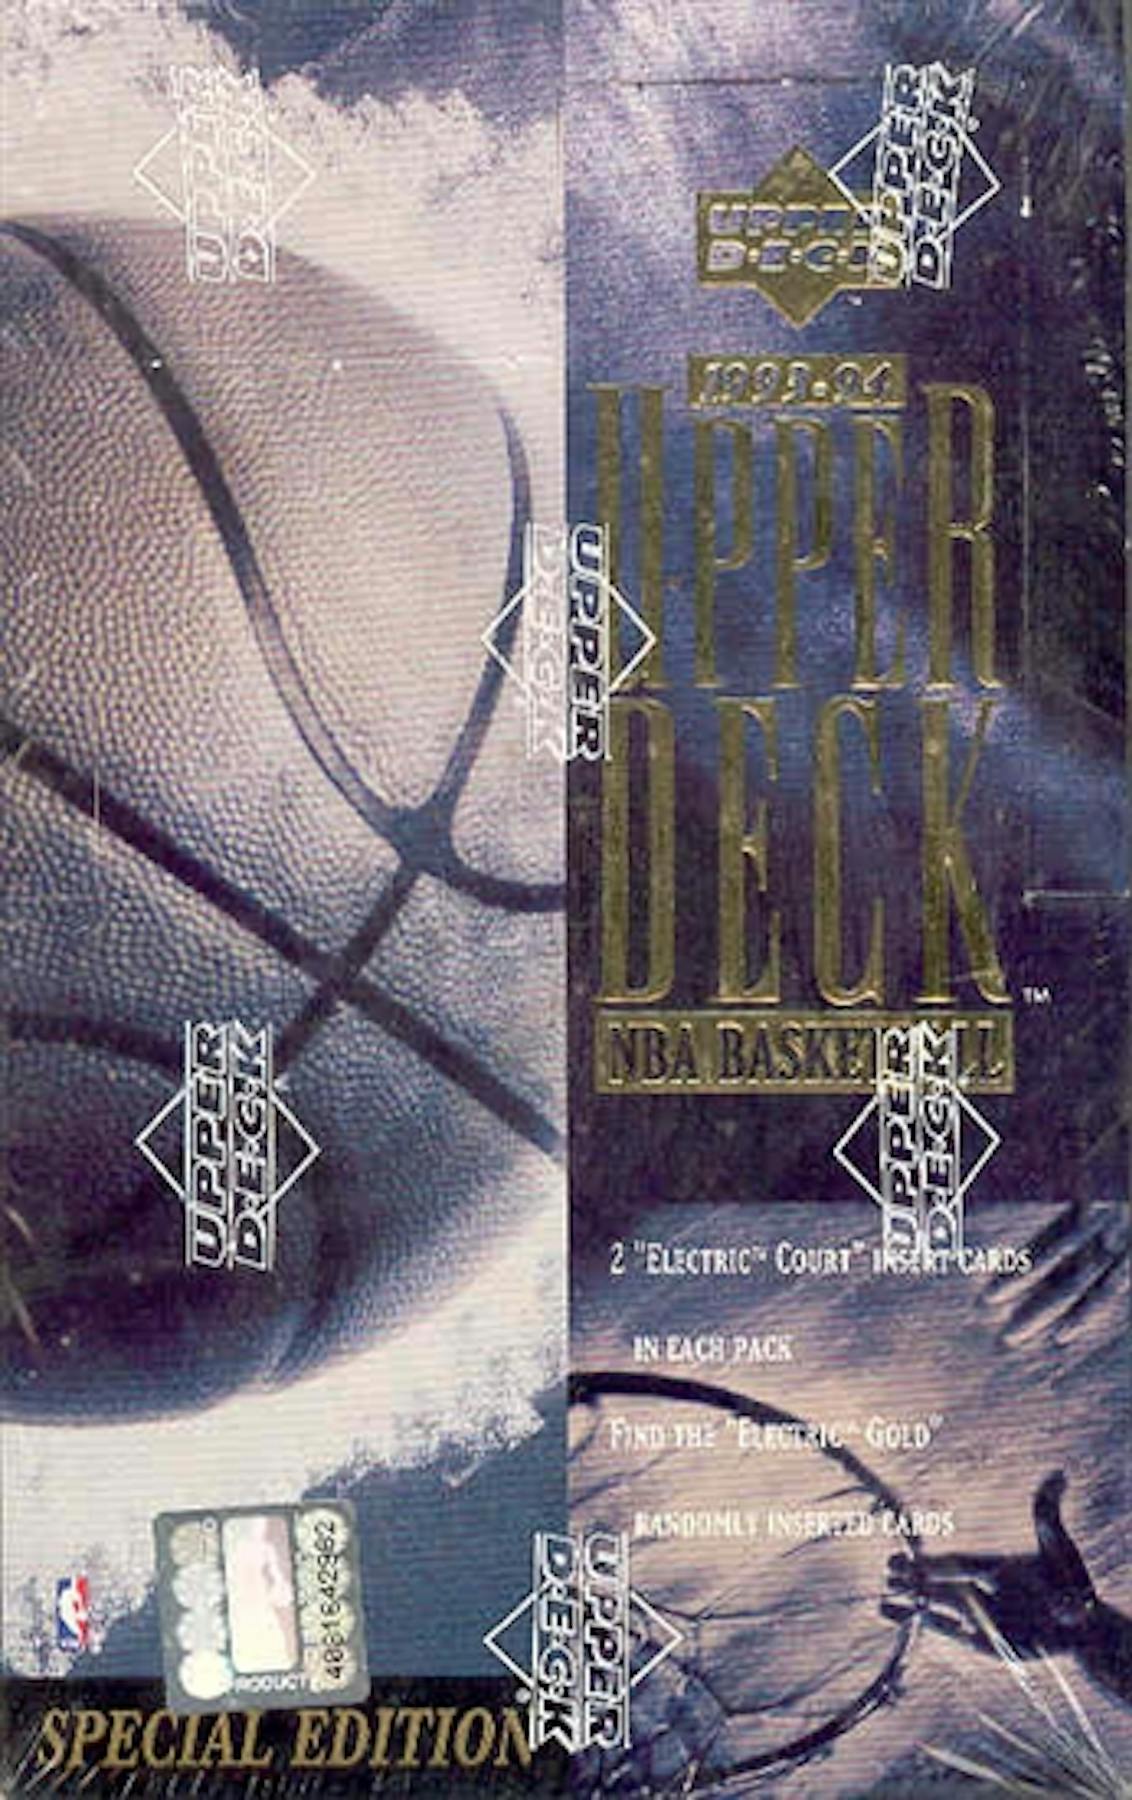 1993-94 Upper Deck Basketball Cards Series One - Economy Candy